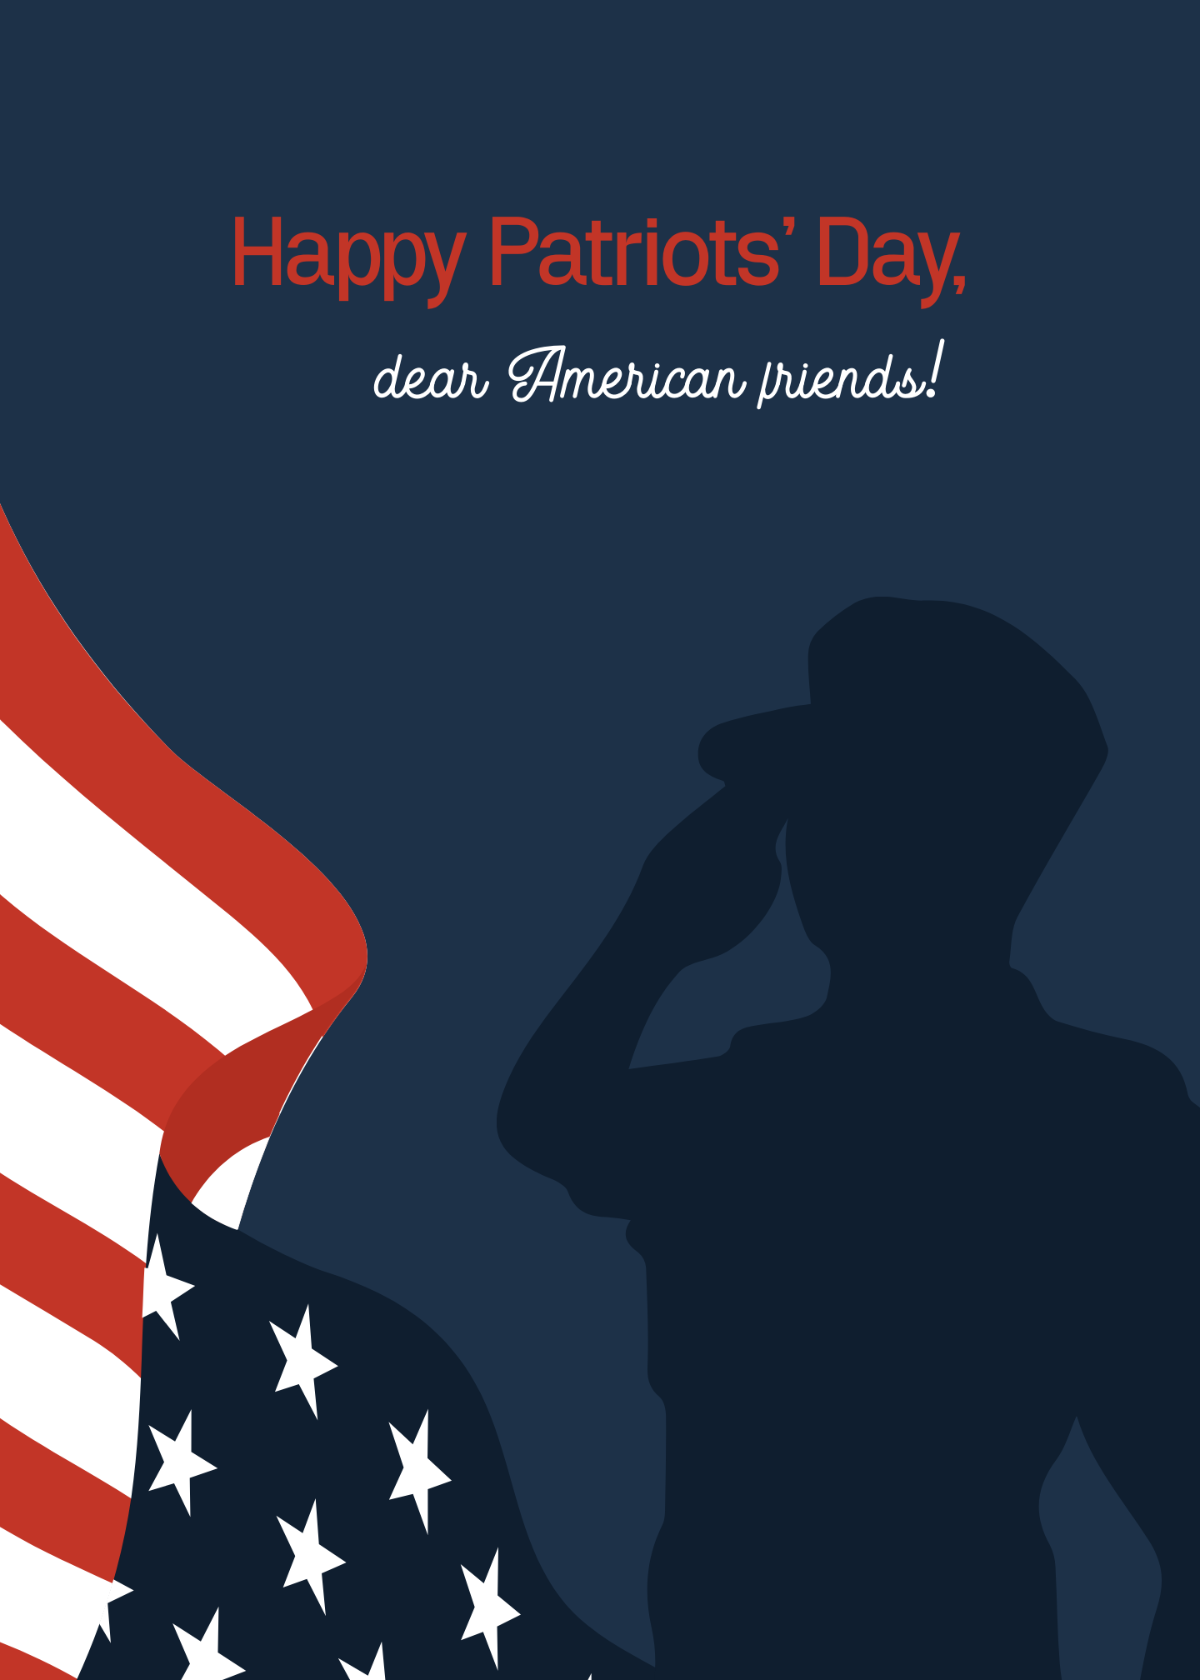 Patriots' Day Greeting Template